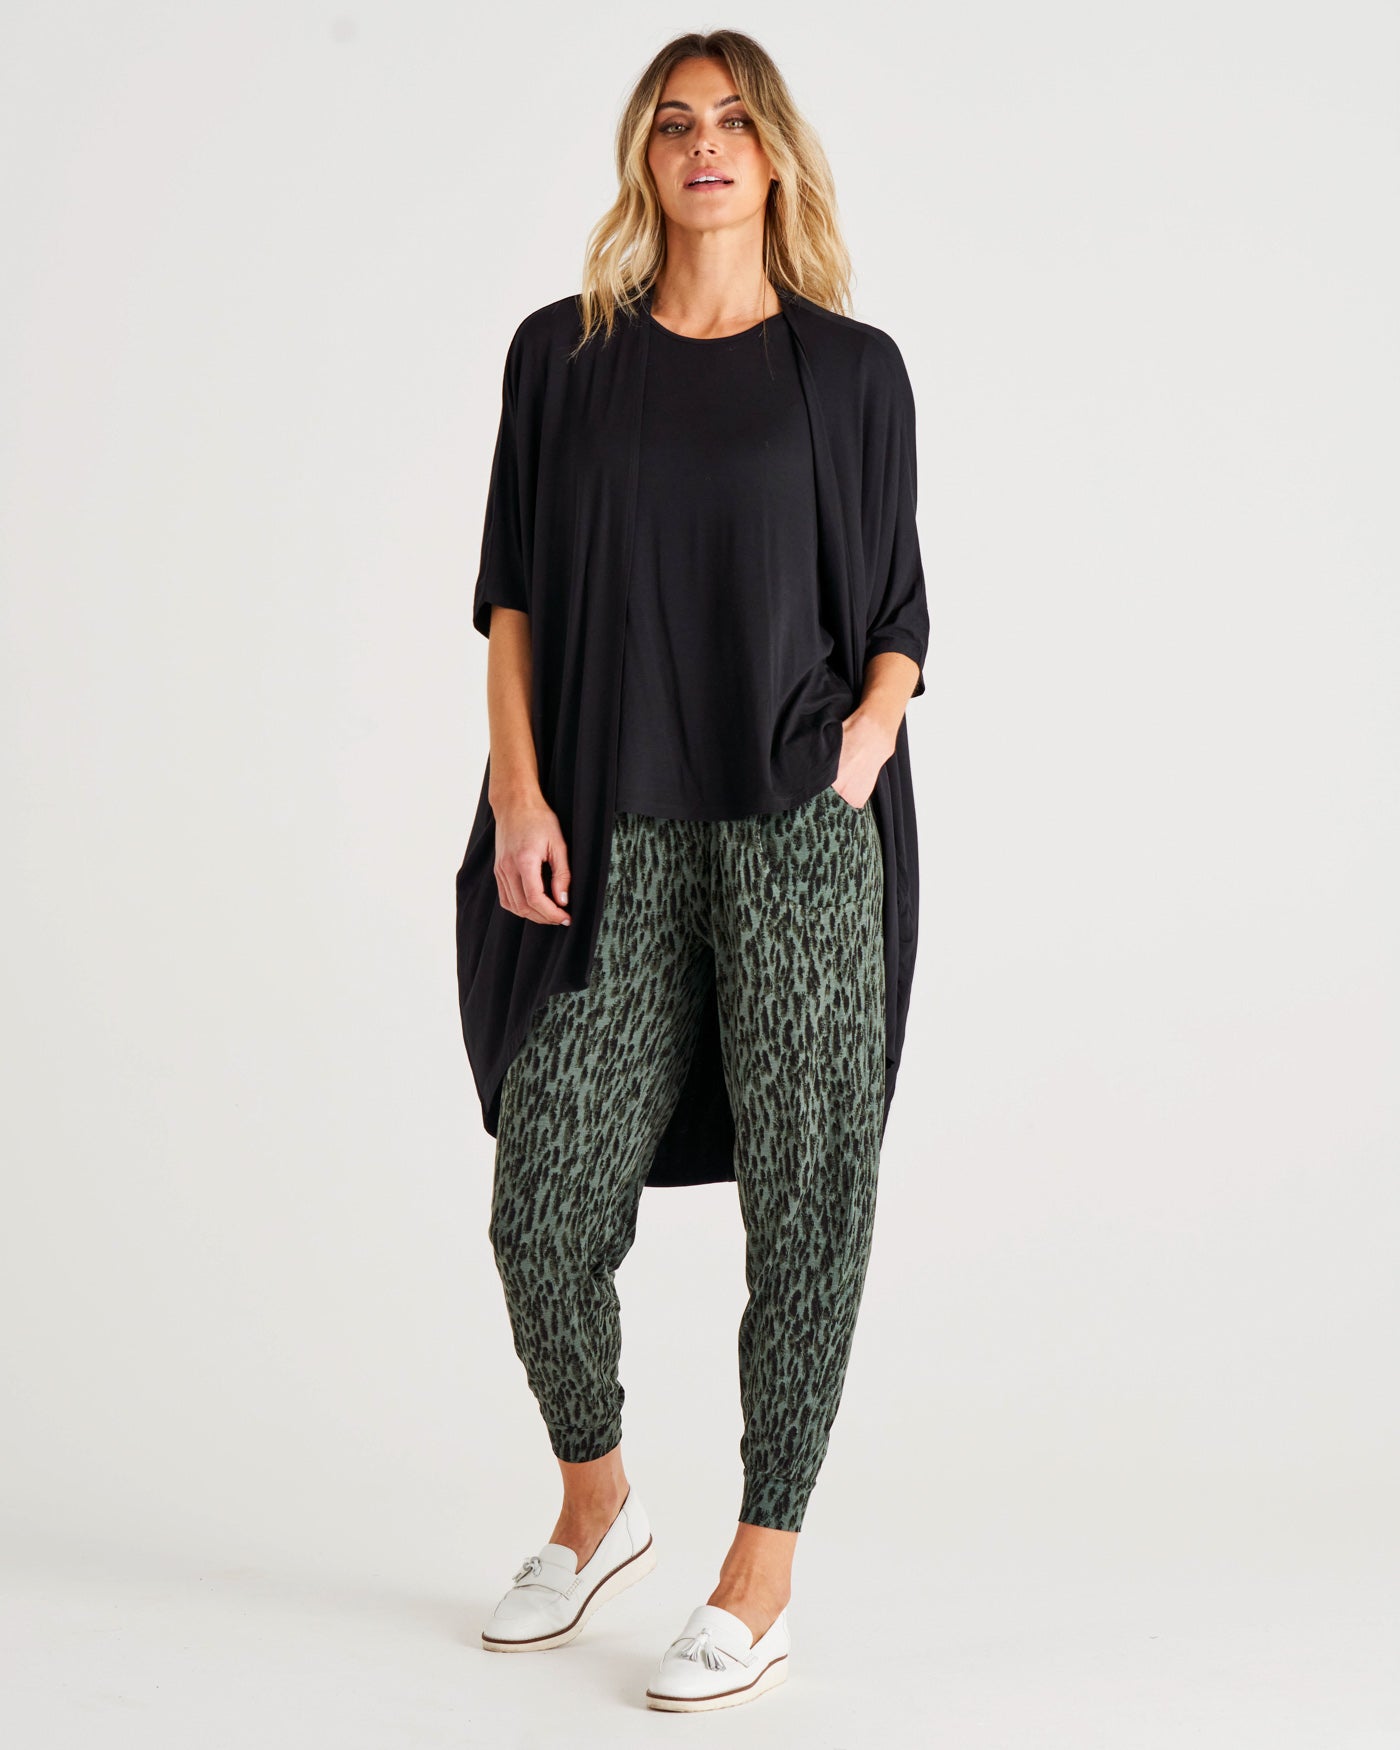 Paris Mid-Rise Stretchy Loose Fitting Jogger Pants - Abstract Green Print